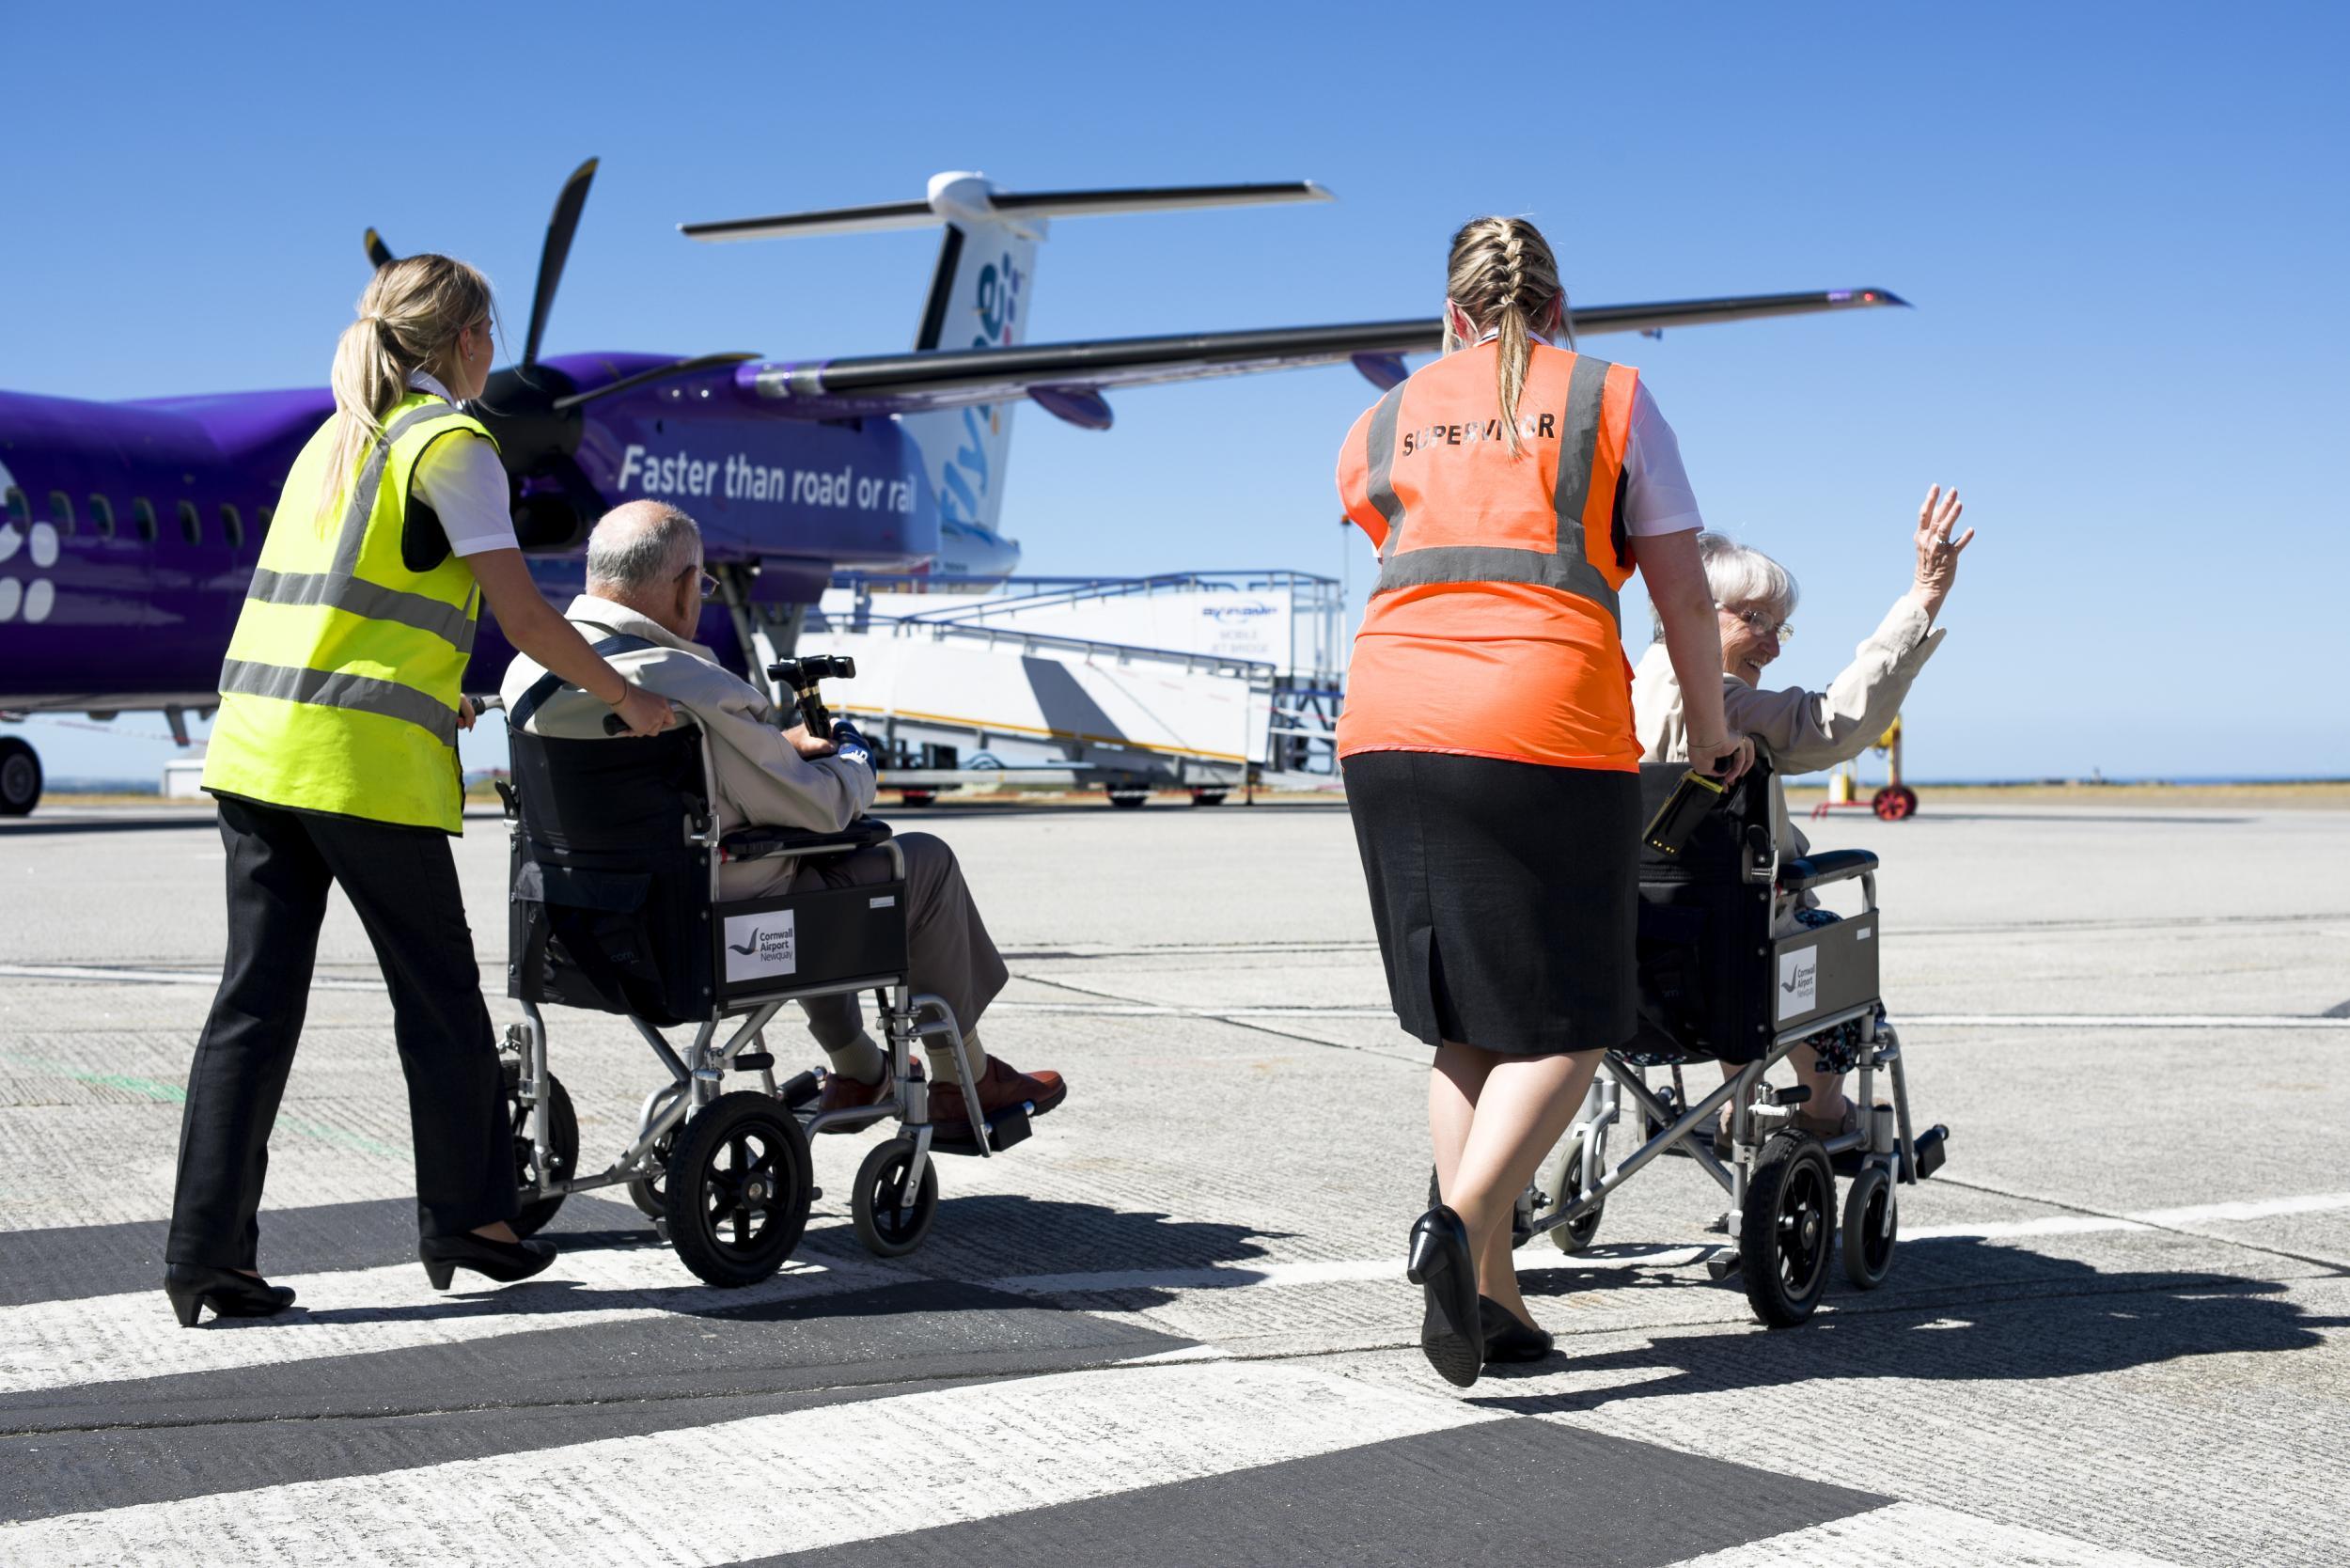 Staff are kind to passengers with special needs - whether those in wheelchairs or families